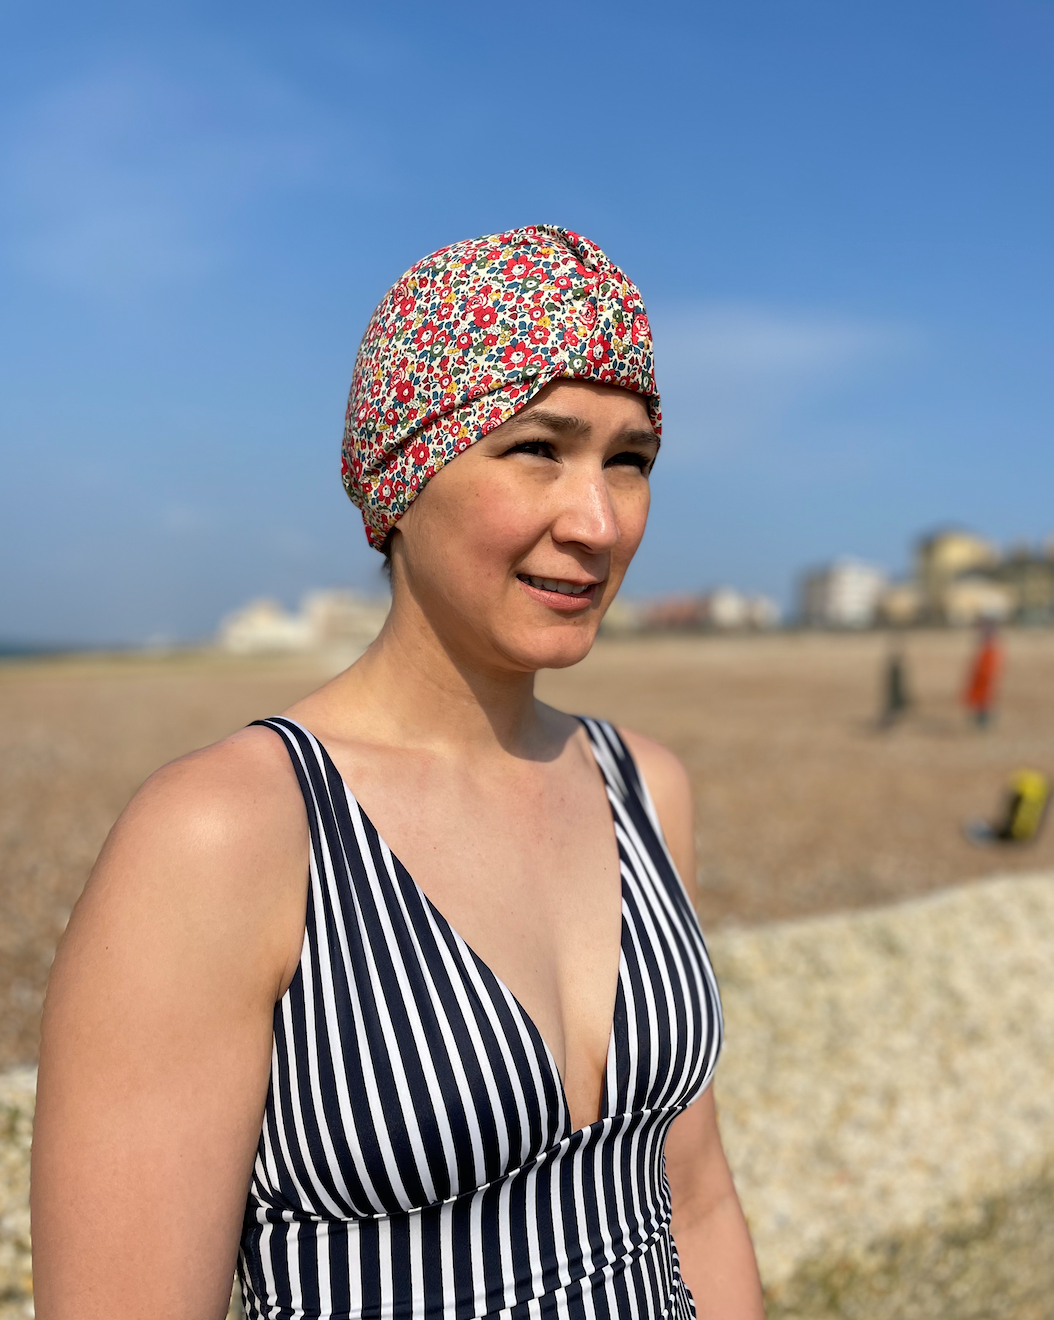 Salty Sea Knot - Swimming Cap Topper / Turban - Betsy Ann Red